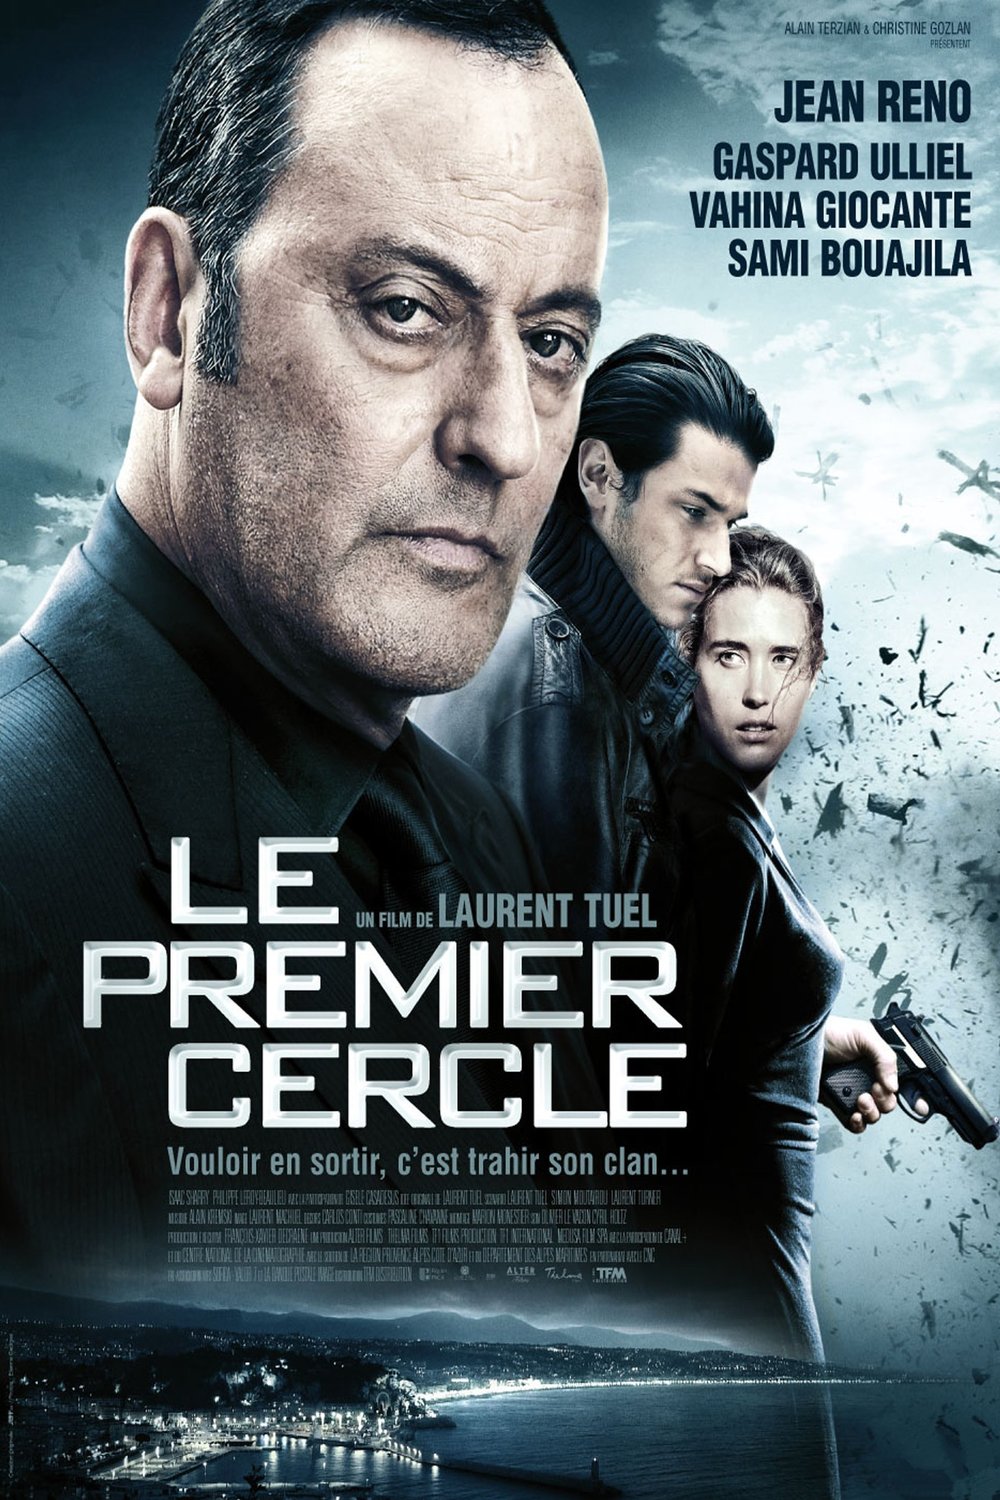 Poster of the movie Le premier cercle